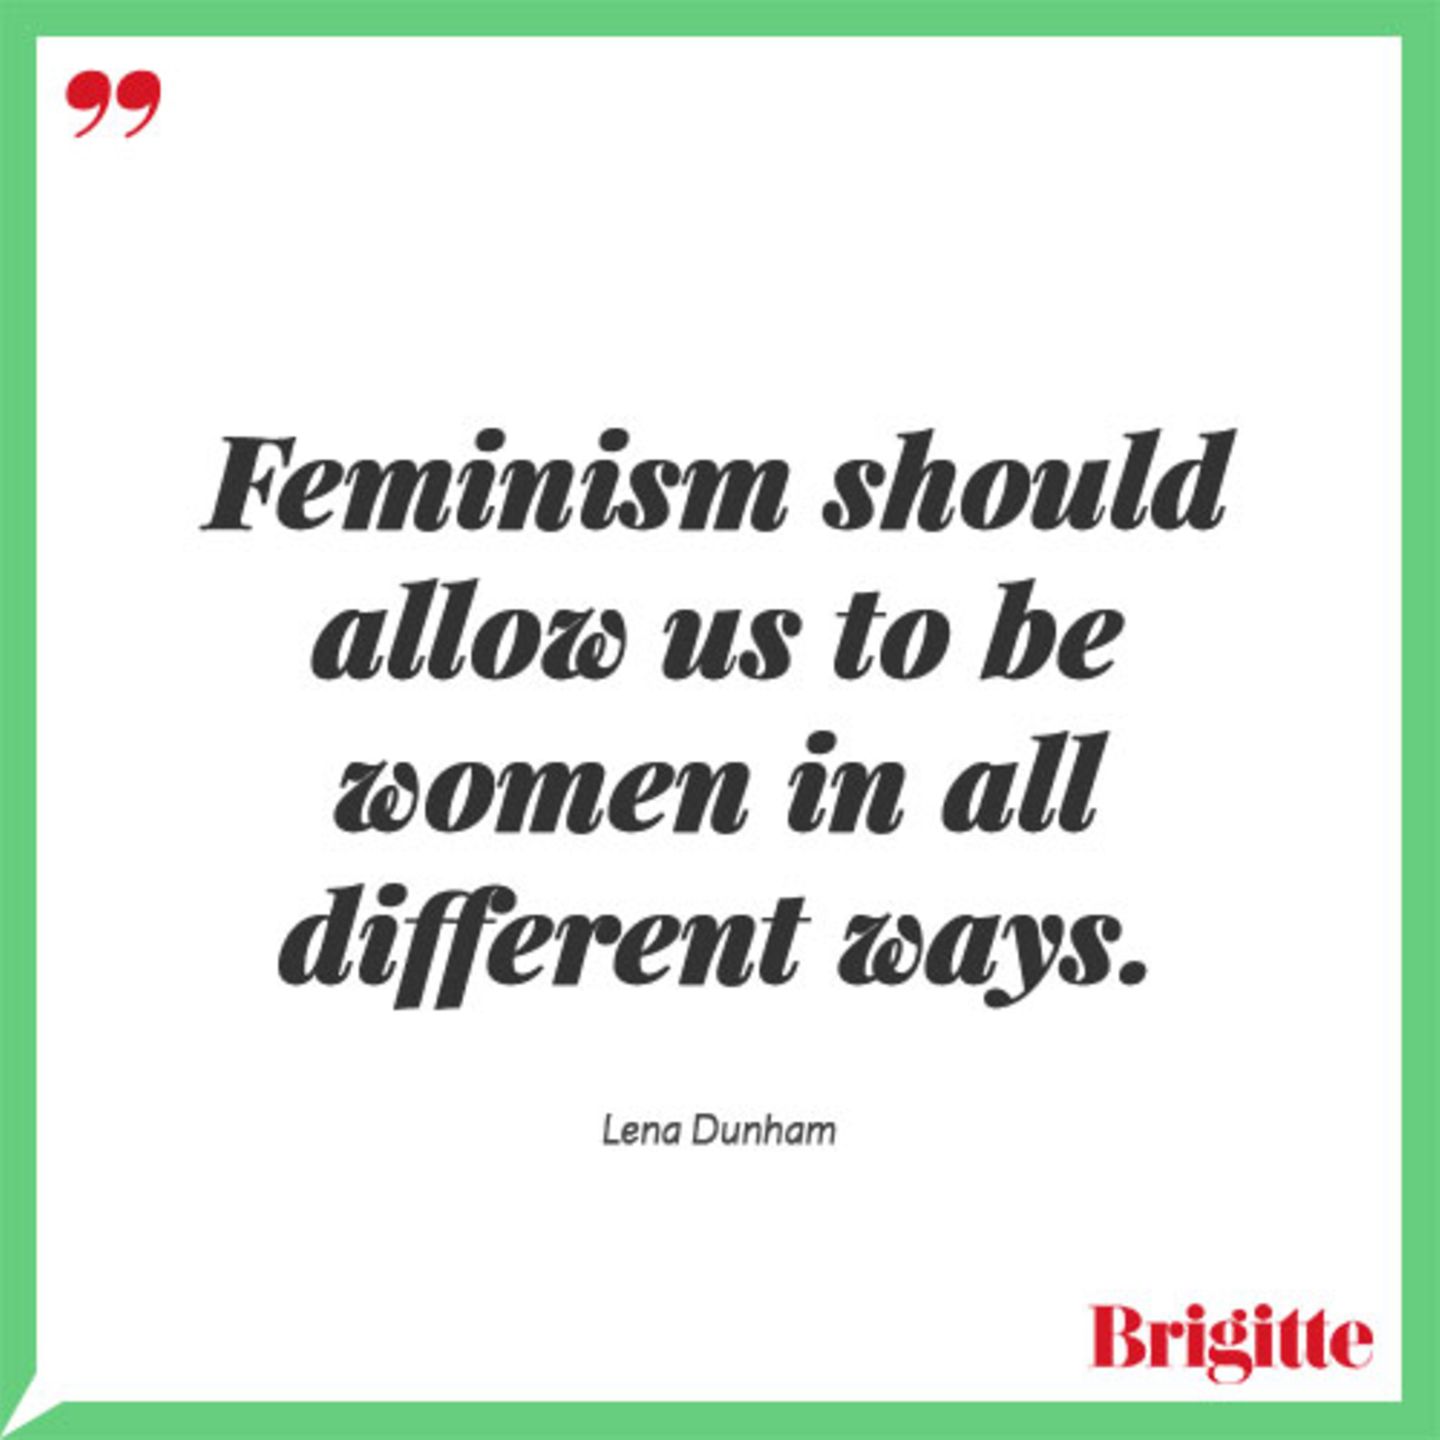 Feminism should allow us to be women in all different ways.